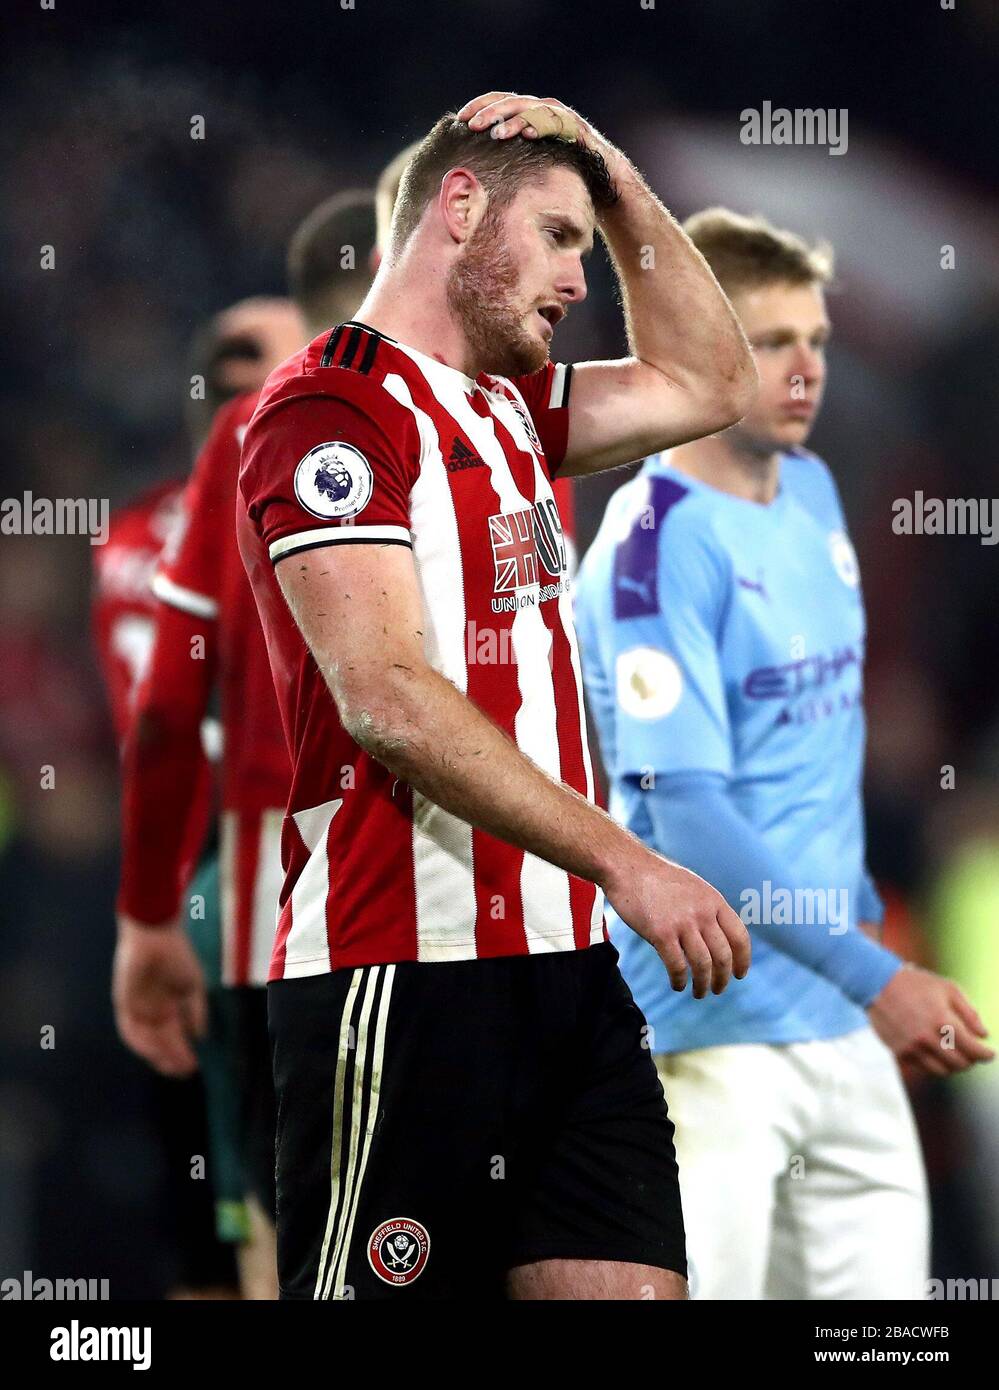 Sheffield United's Jack O'Connell appears dejected after the final whistle Stock Photo